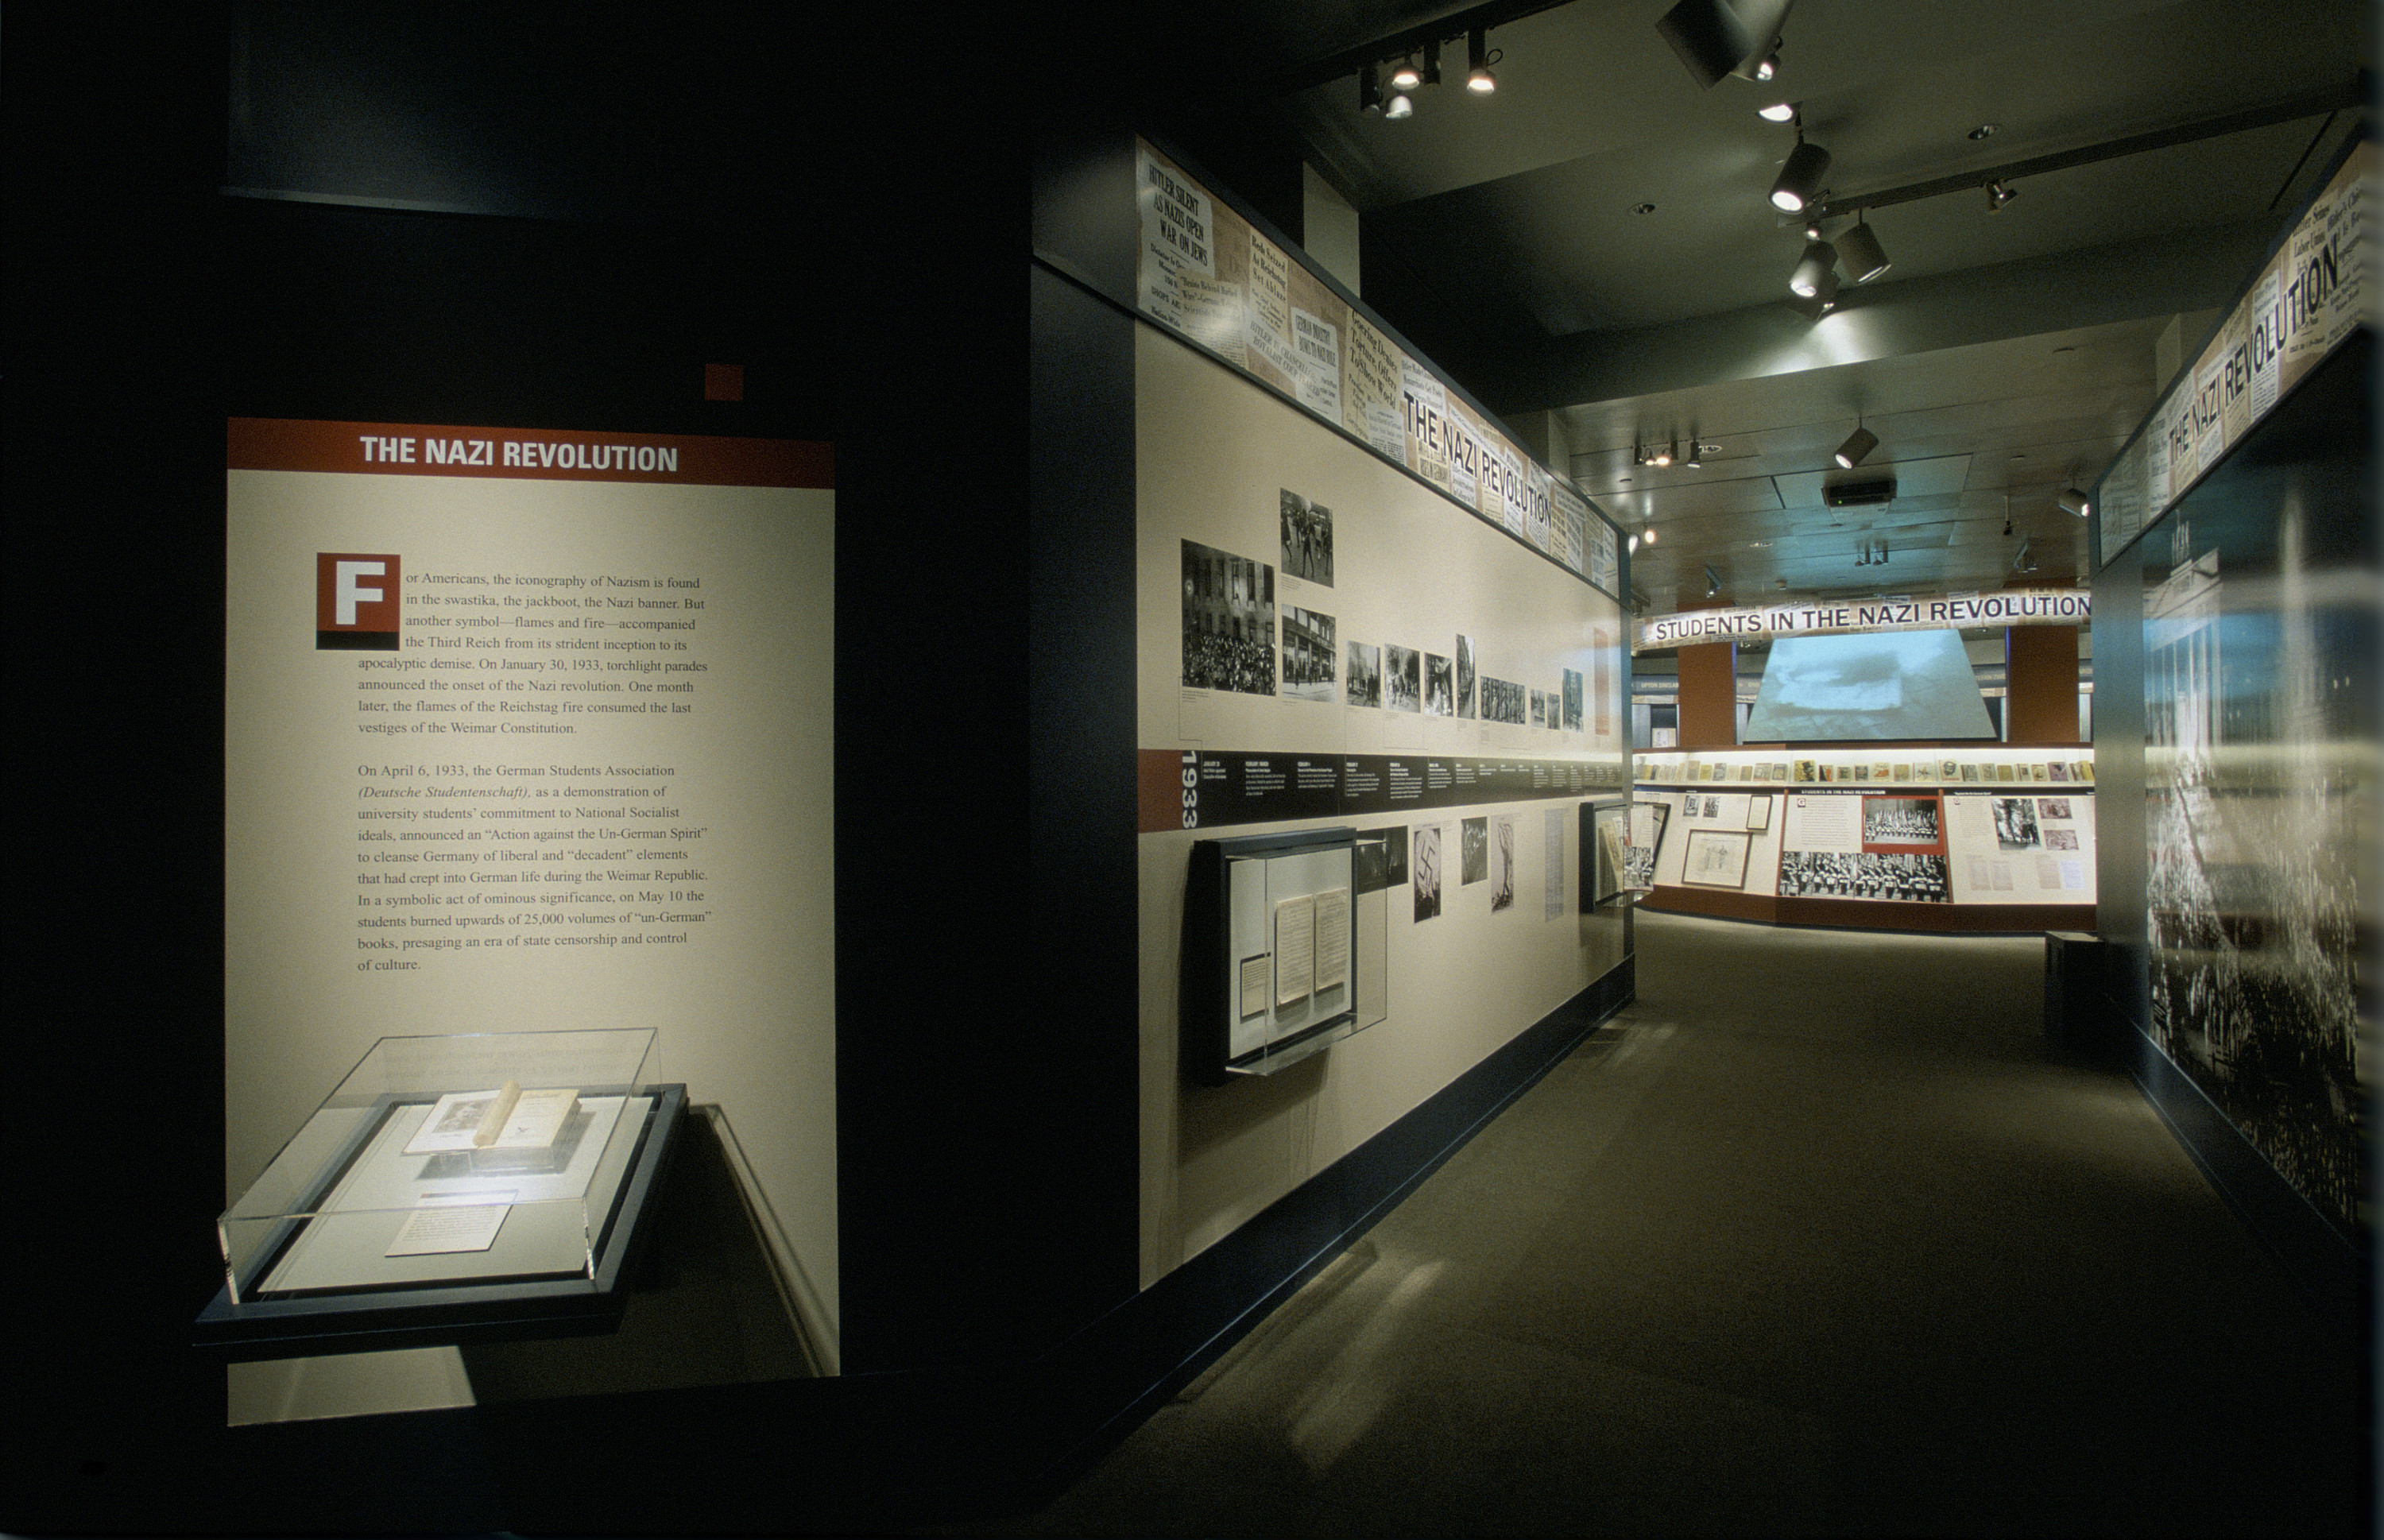 View of the Nazi Revolution section of the special exhibition "Fighting the Fires of Hate: America and the Nazi Book Burnings" (April 29 -- October 13, 2003), U.S. Holocaust Memorial Museum.